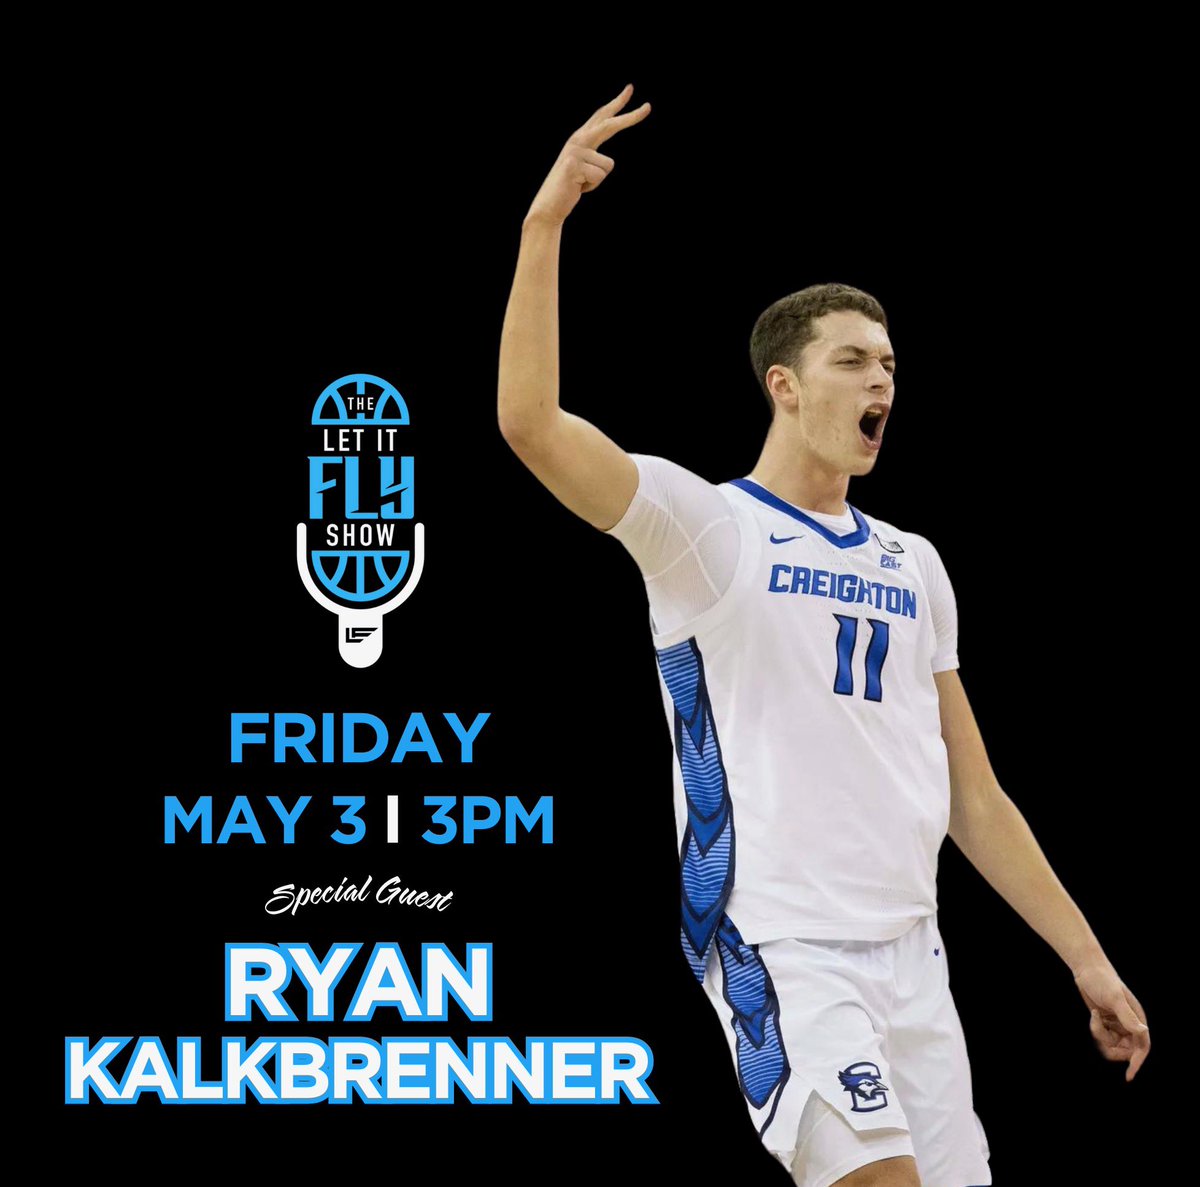 WELCOME BACK!! Our next episode features @bluejaymbb Ryan Kalkbrenner ( @RyanKalkbrenner ). The episode drops TOMORROW at 3pm! Hit the link in our bio to SUBSCRIBE! #LetItFly #Omaha #Nebraska #Basketball #Creighton #RDJ #GoJays